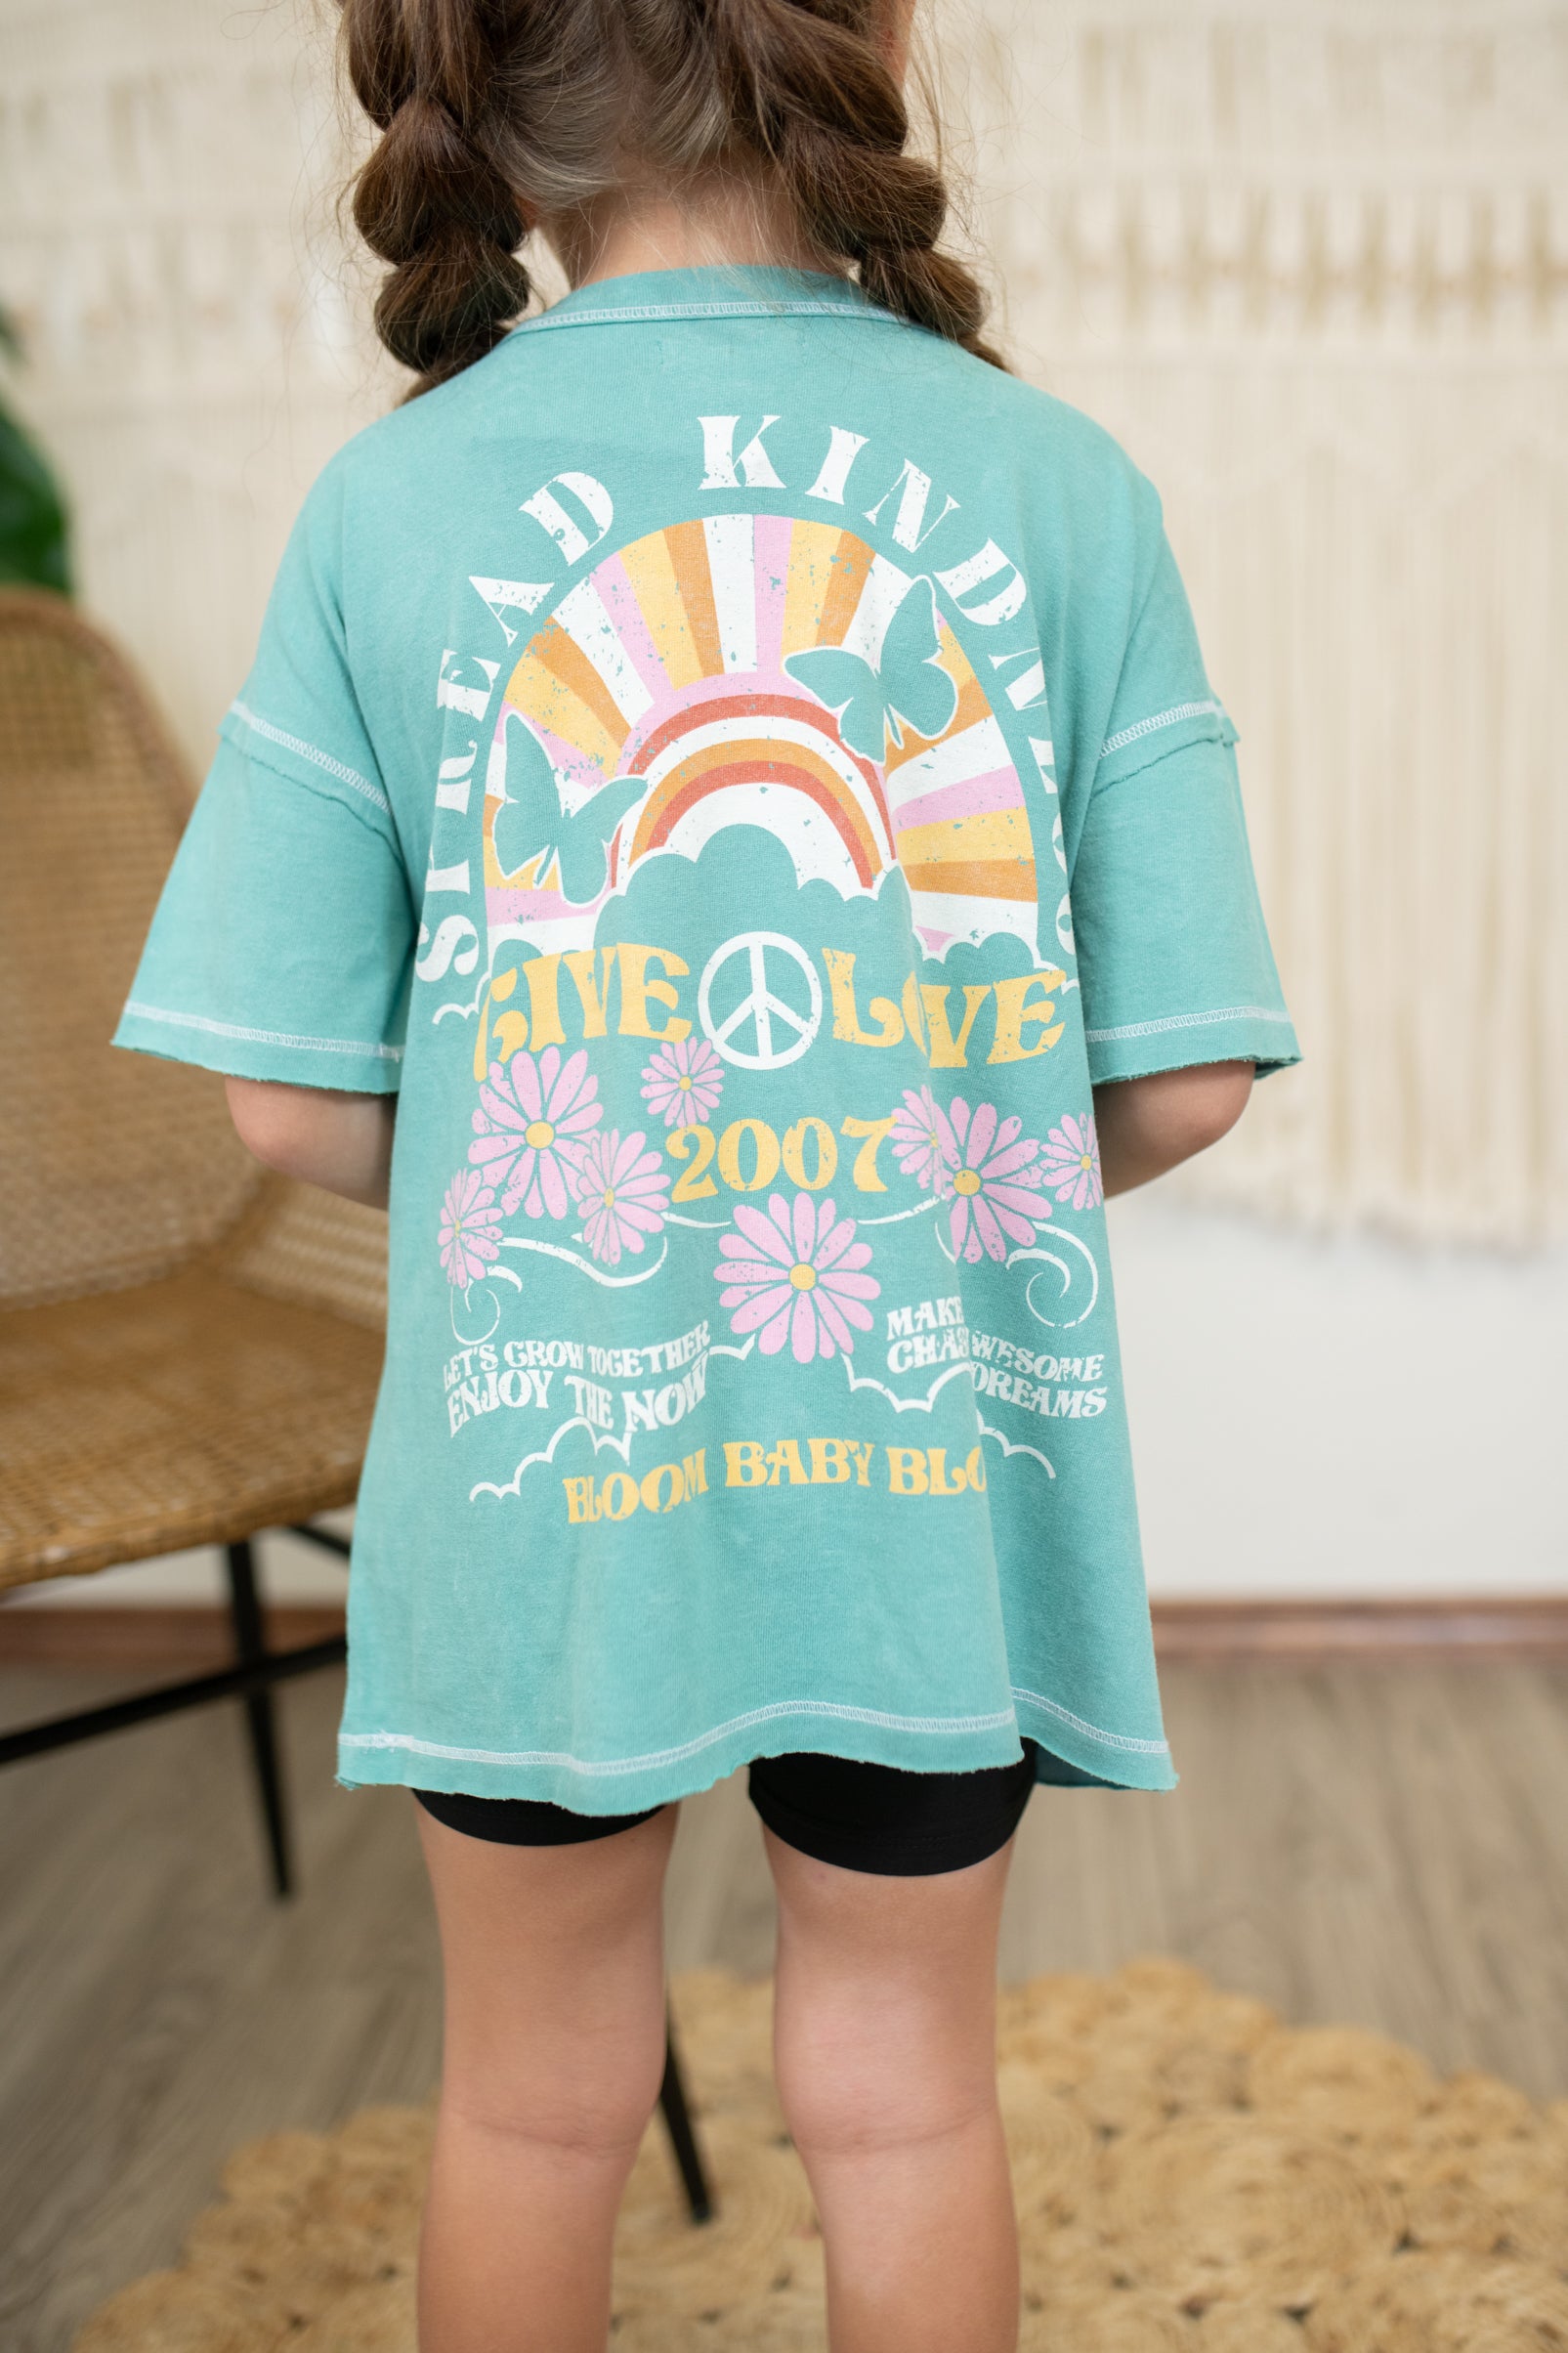 Wasabi Spread Kindness Give Love Graphic Tee